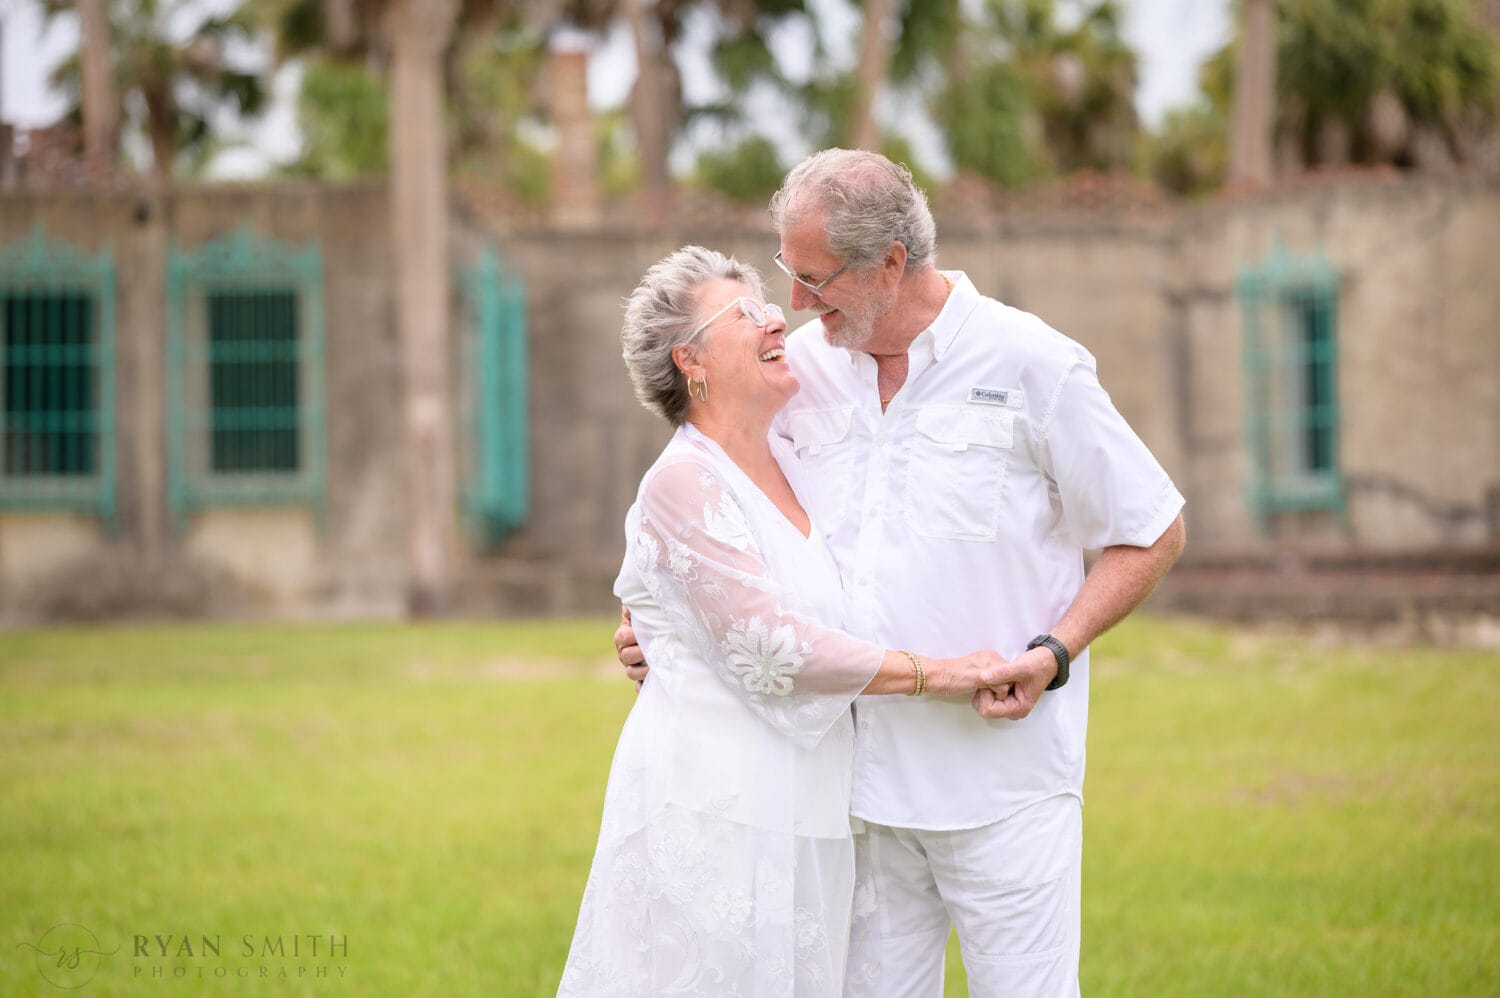 50th Anniversary pictures with a happy couple by the Atalaya Castle - Huntington Beach State Park - Myrtle Beach